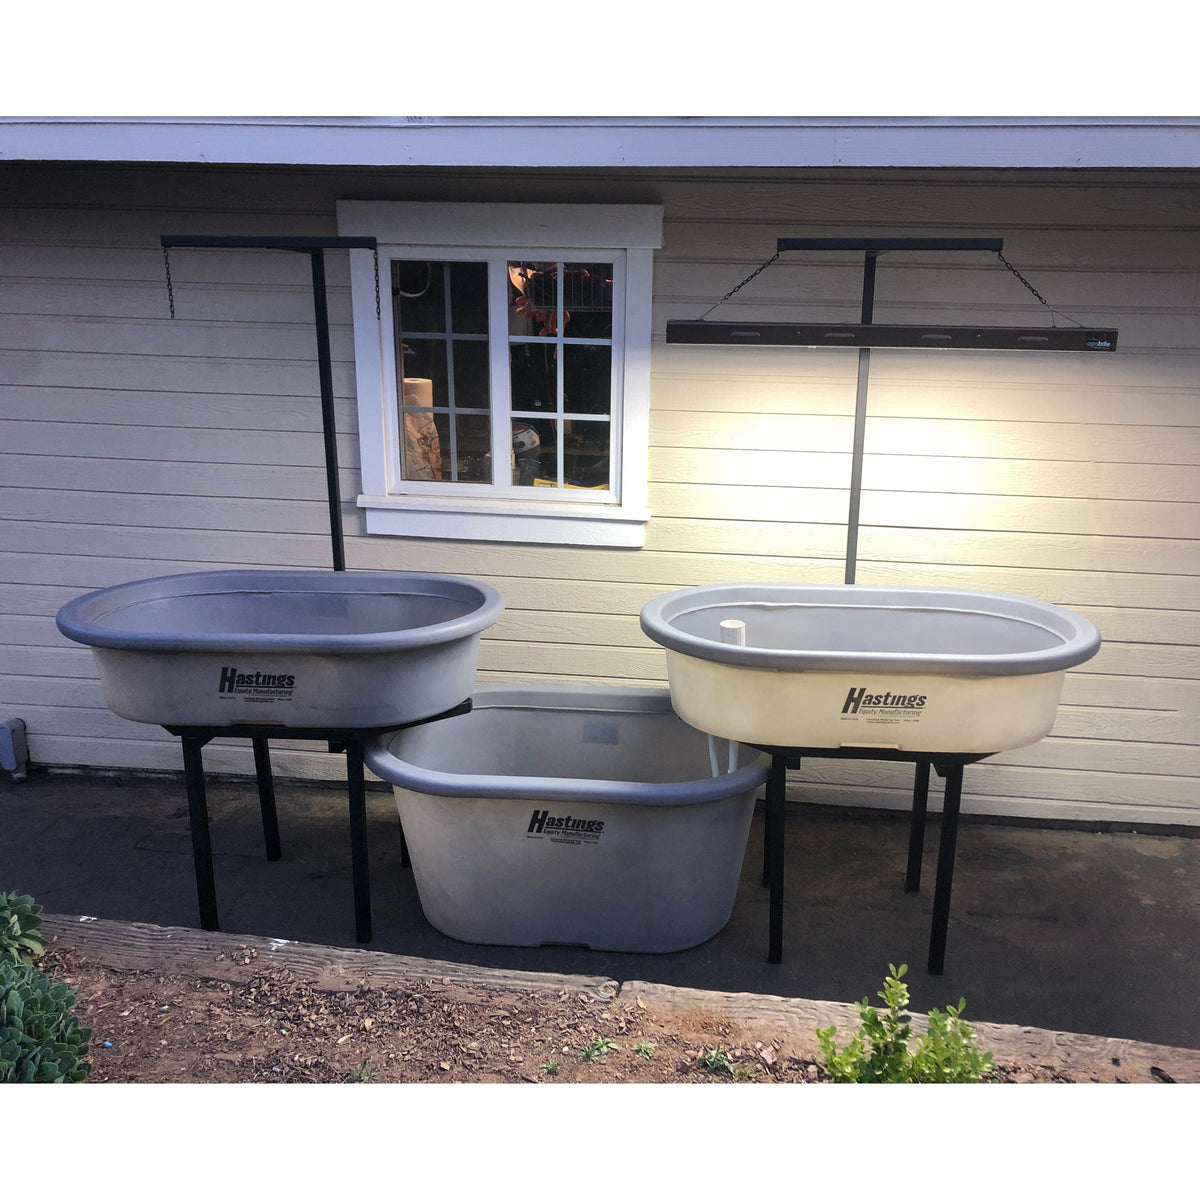 A Go Green Double Aquaponics System featuring three gray tubs on a stand outside of a house.